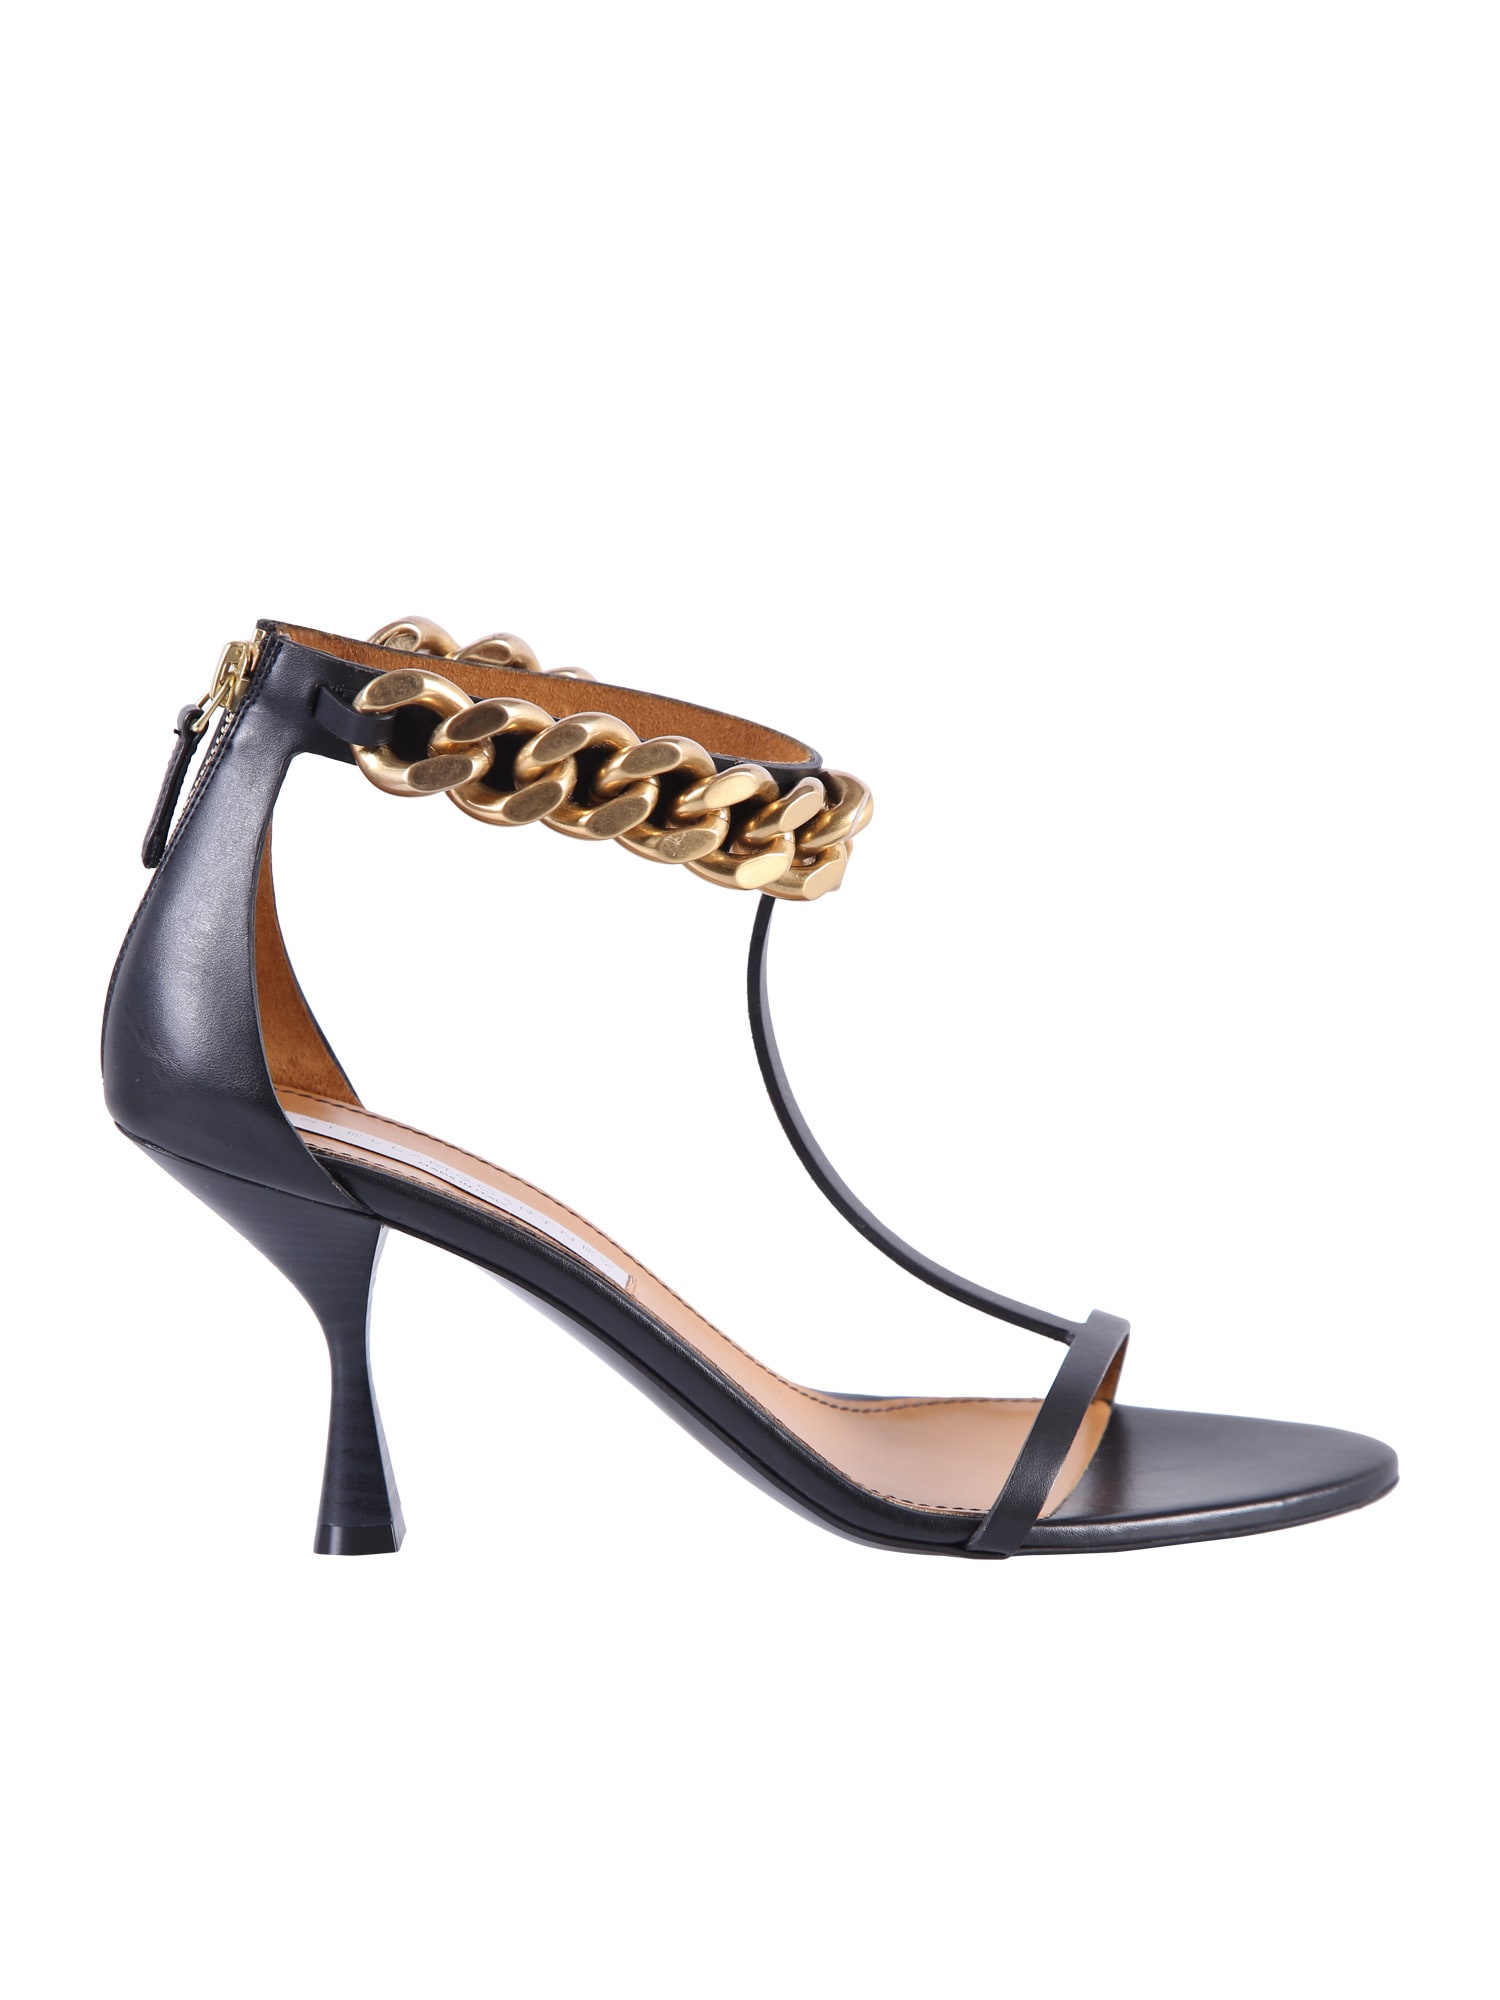 Buy Stella McCartney Chain Detail Sandals online, shop Stella McCartney shoes with free shipping